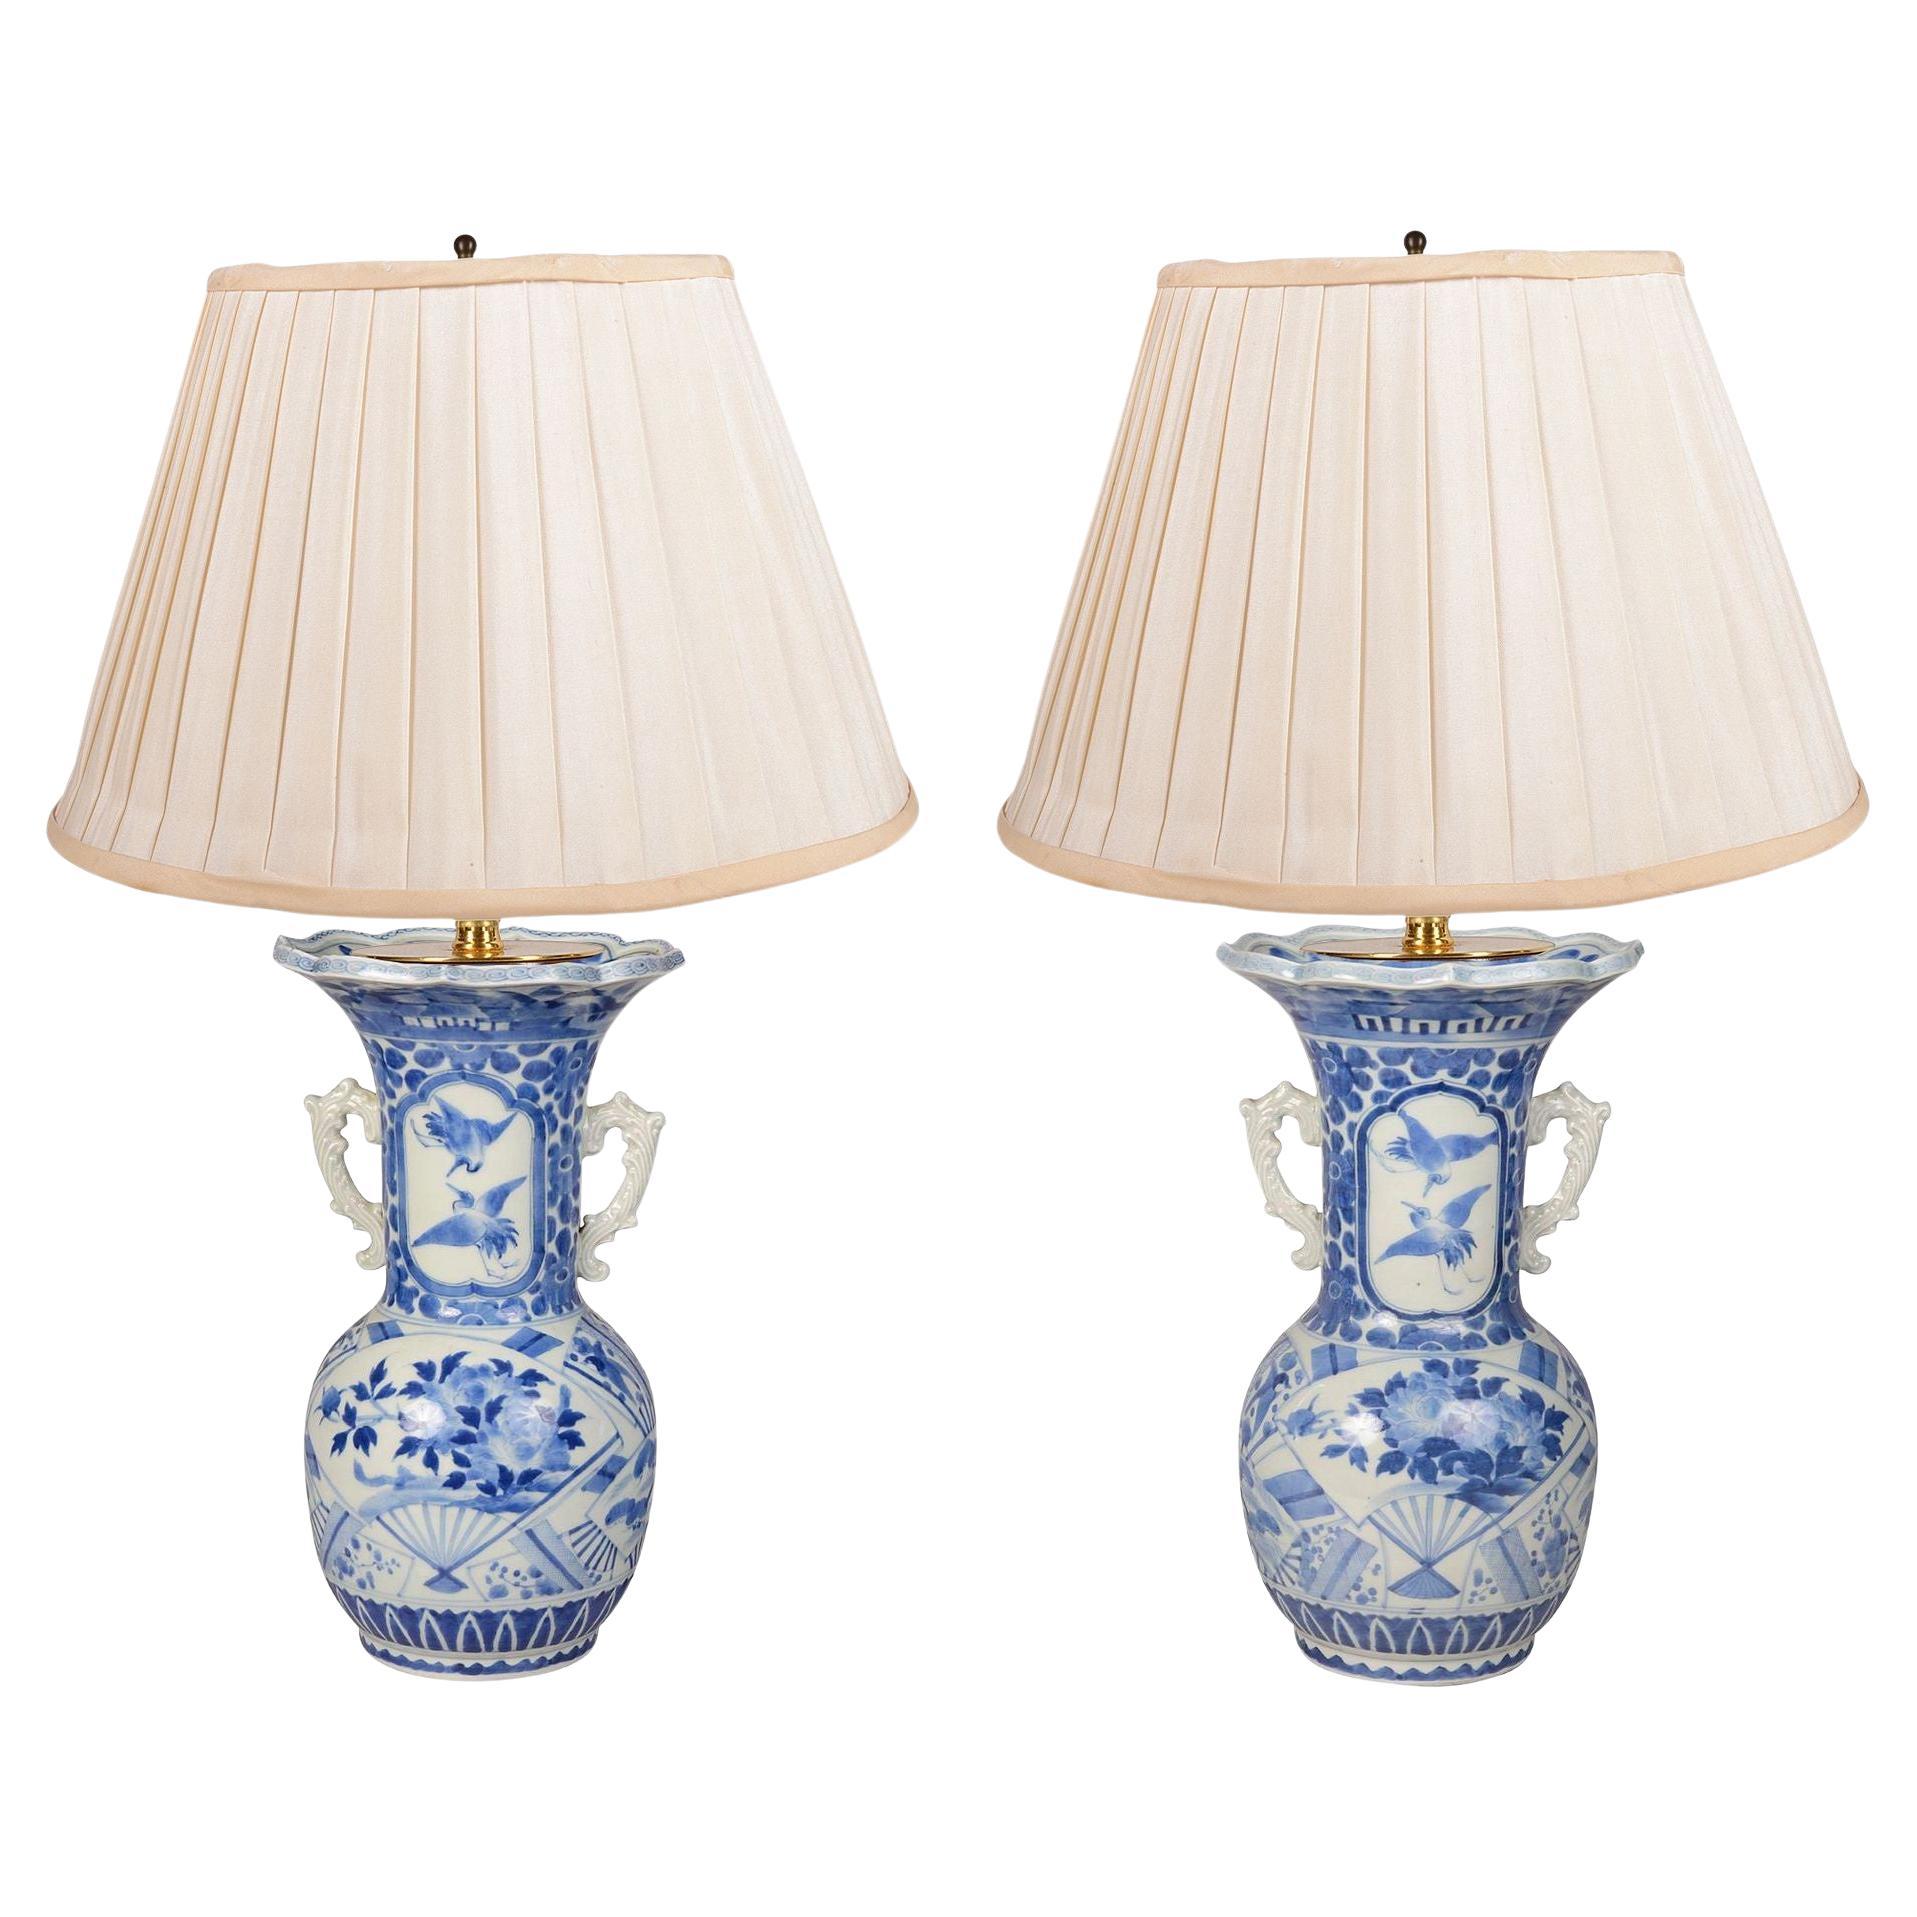 Pair of Japanese Blue and White twin handle lamps / vases, circa 1900